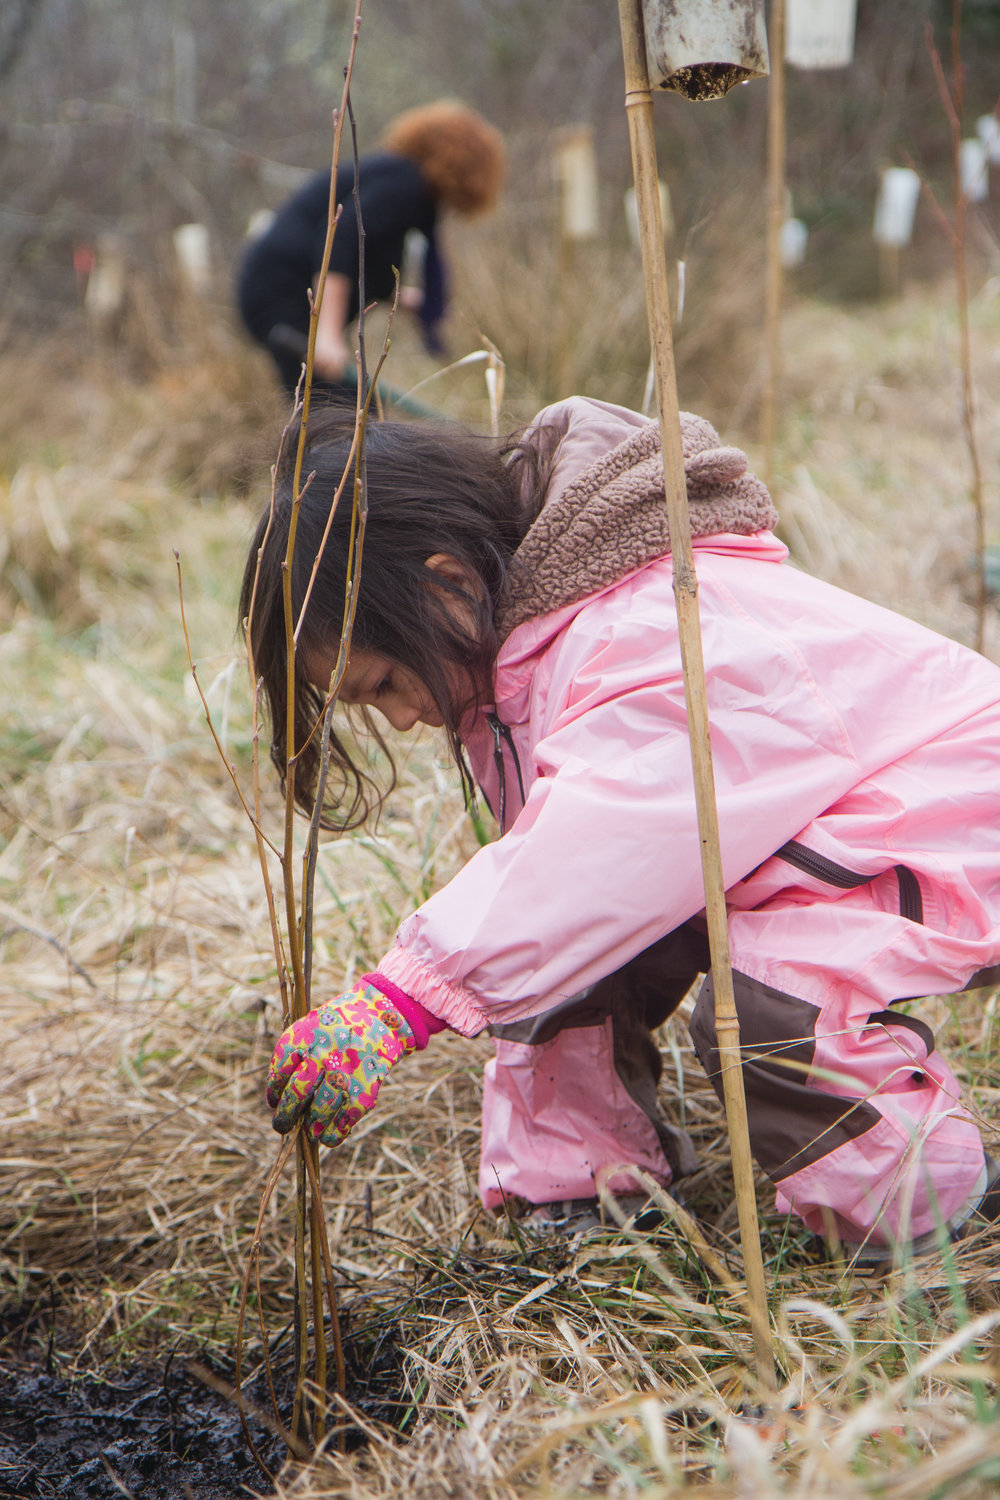 Mei Mei Galligan-Hong suited up in pink to plant trees with her mom, Molly Hong.